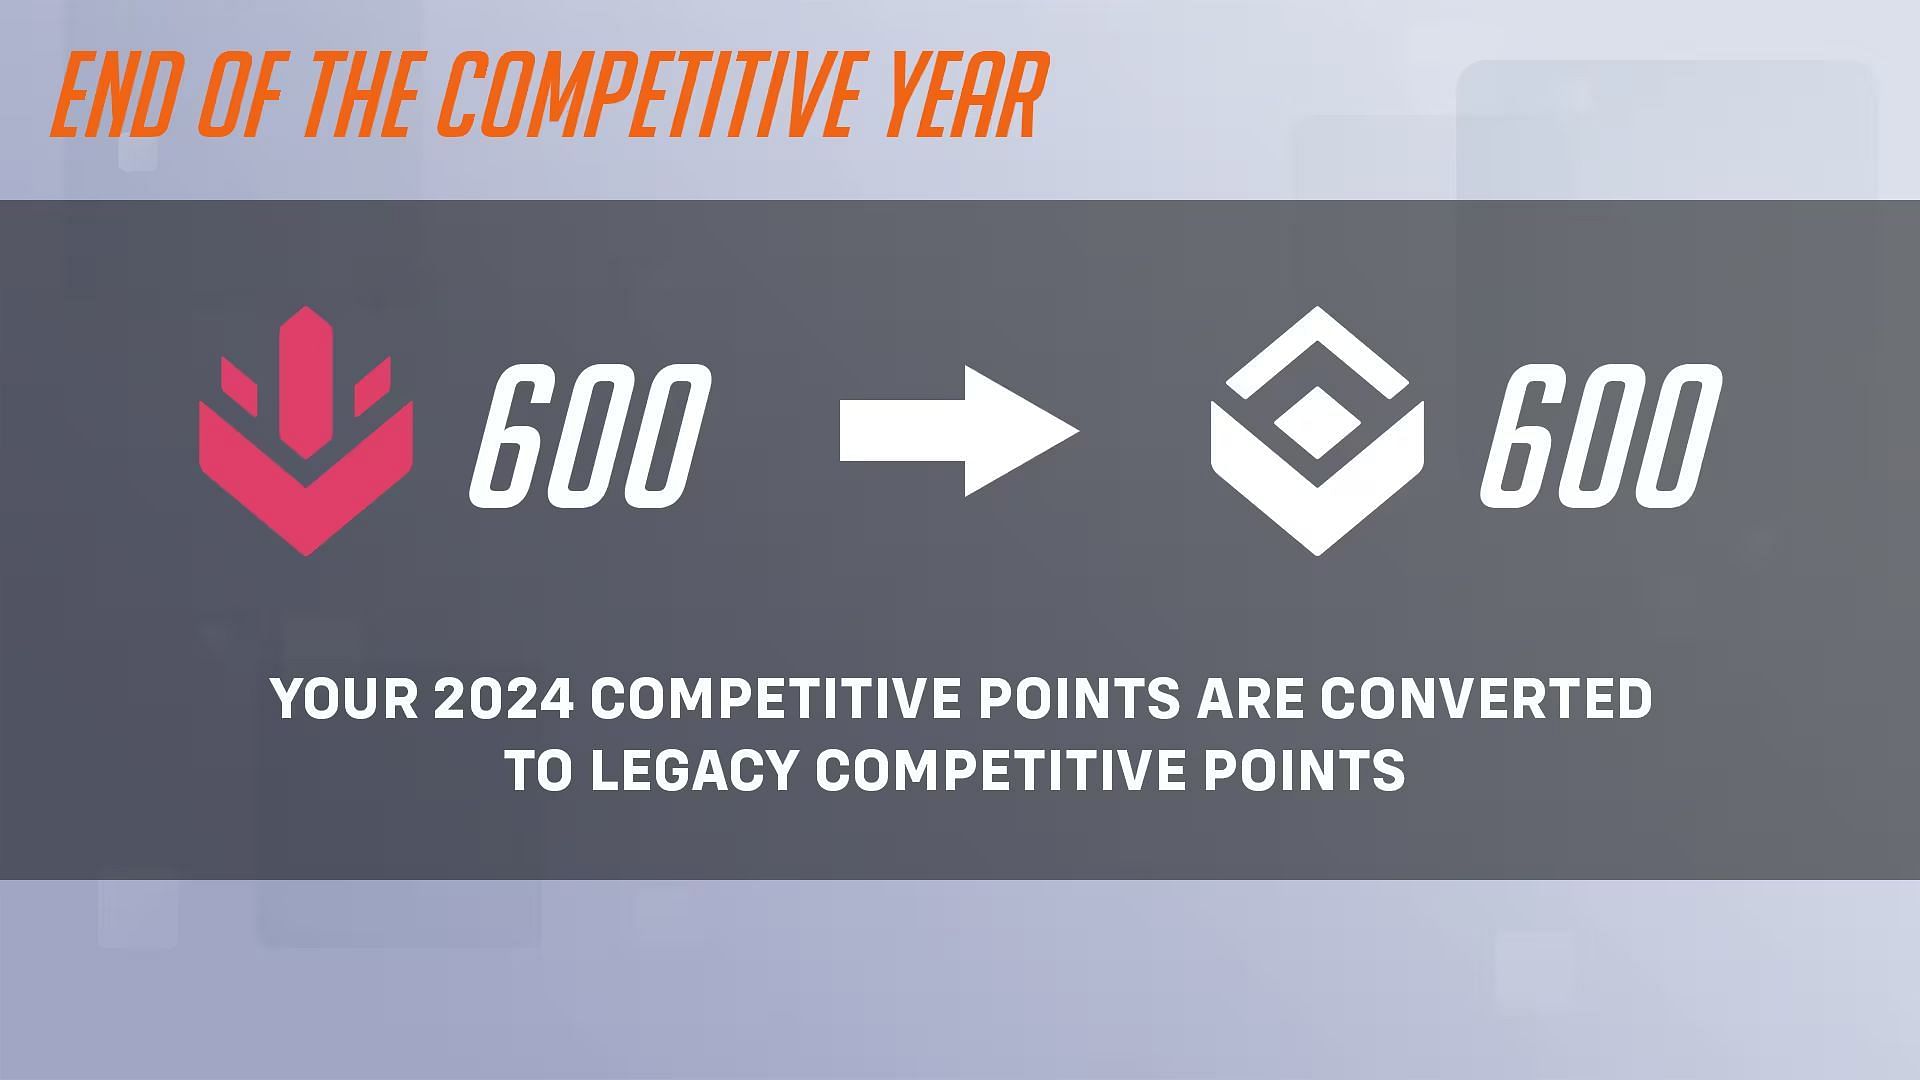 Players will earn Legacy Competitive Points at the end of a Competitive Year (Image via Blizzard Entertainment)